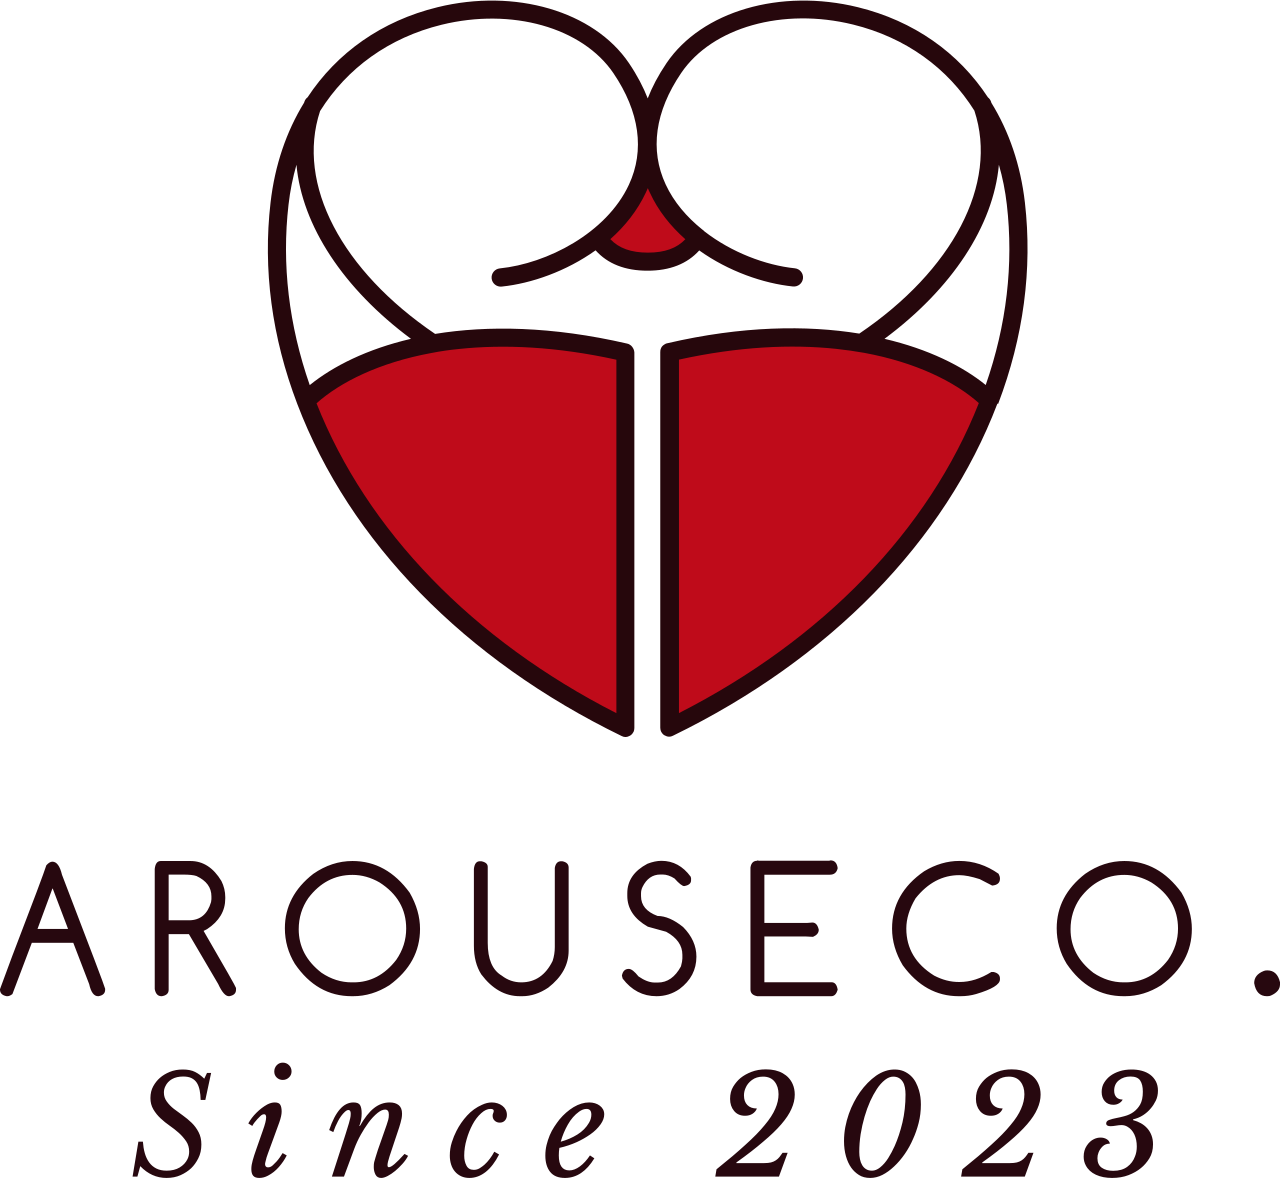 ArouseCo.'s web page